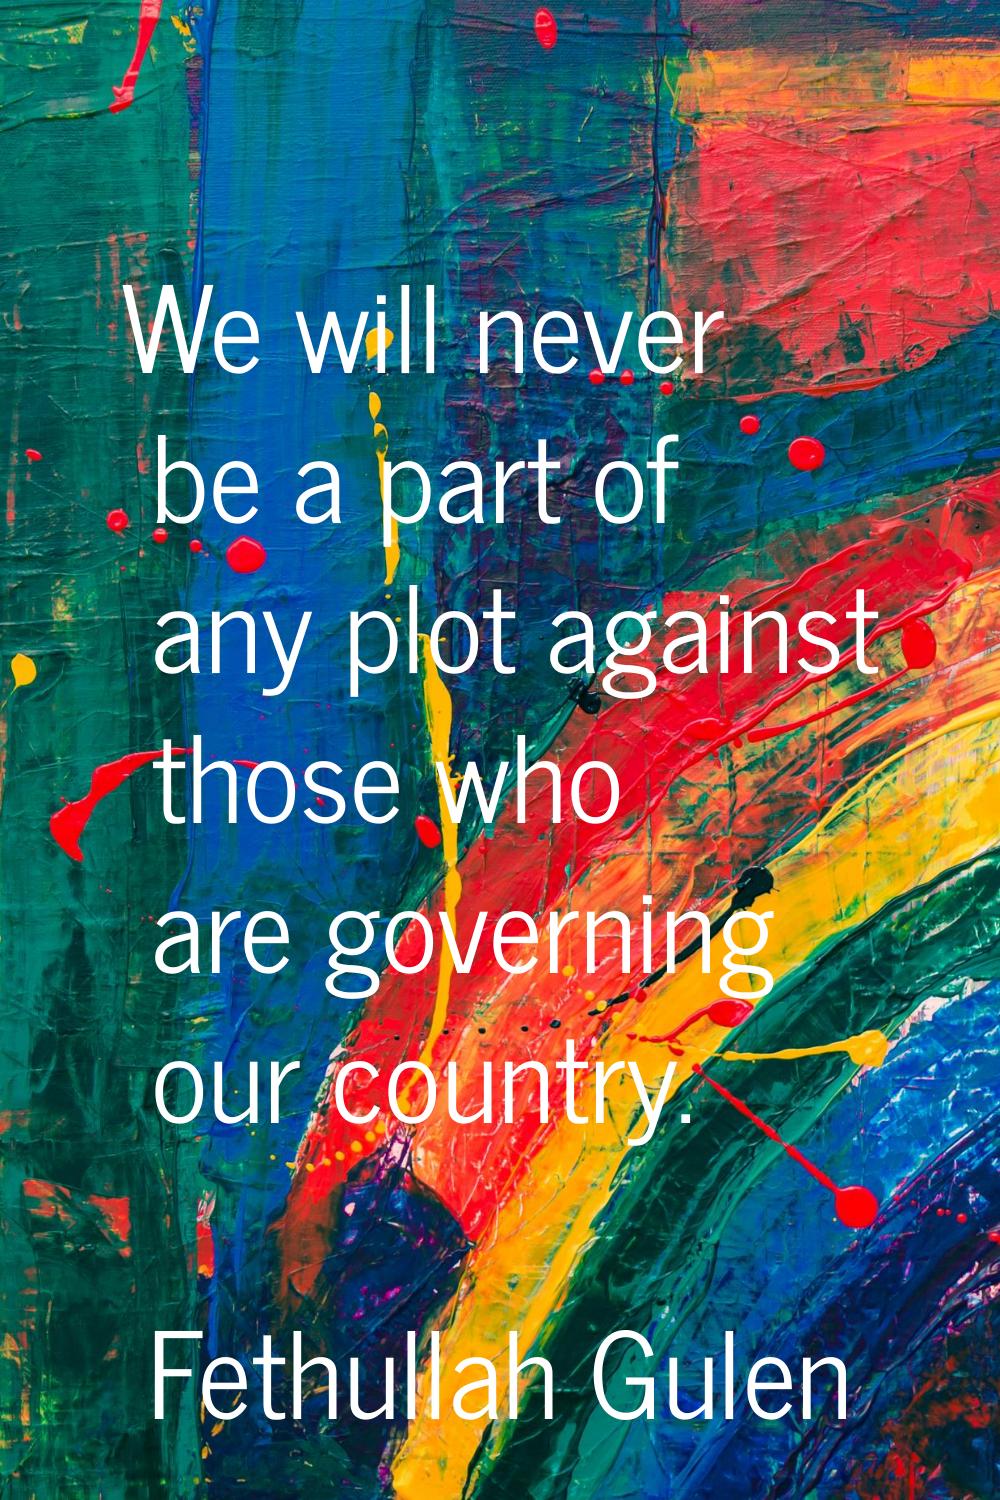 We will never be a part of any plot against those who are governing our country.